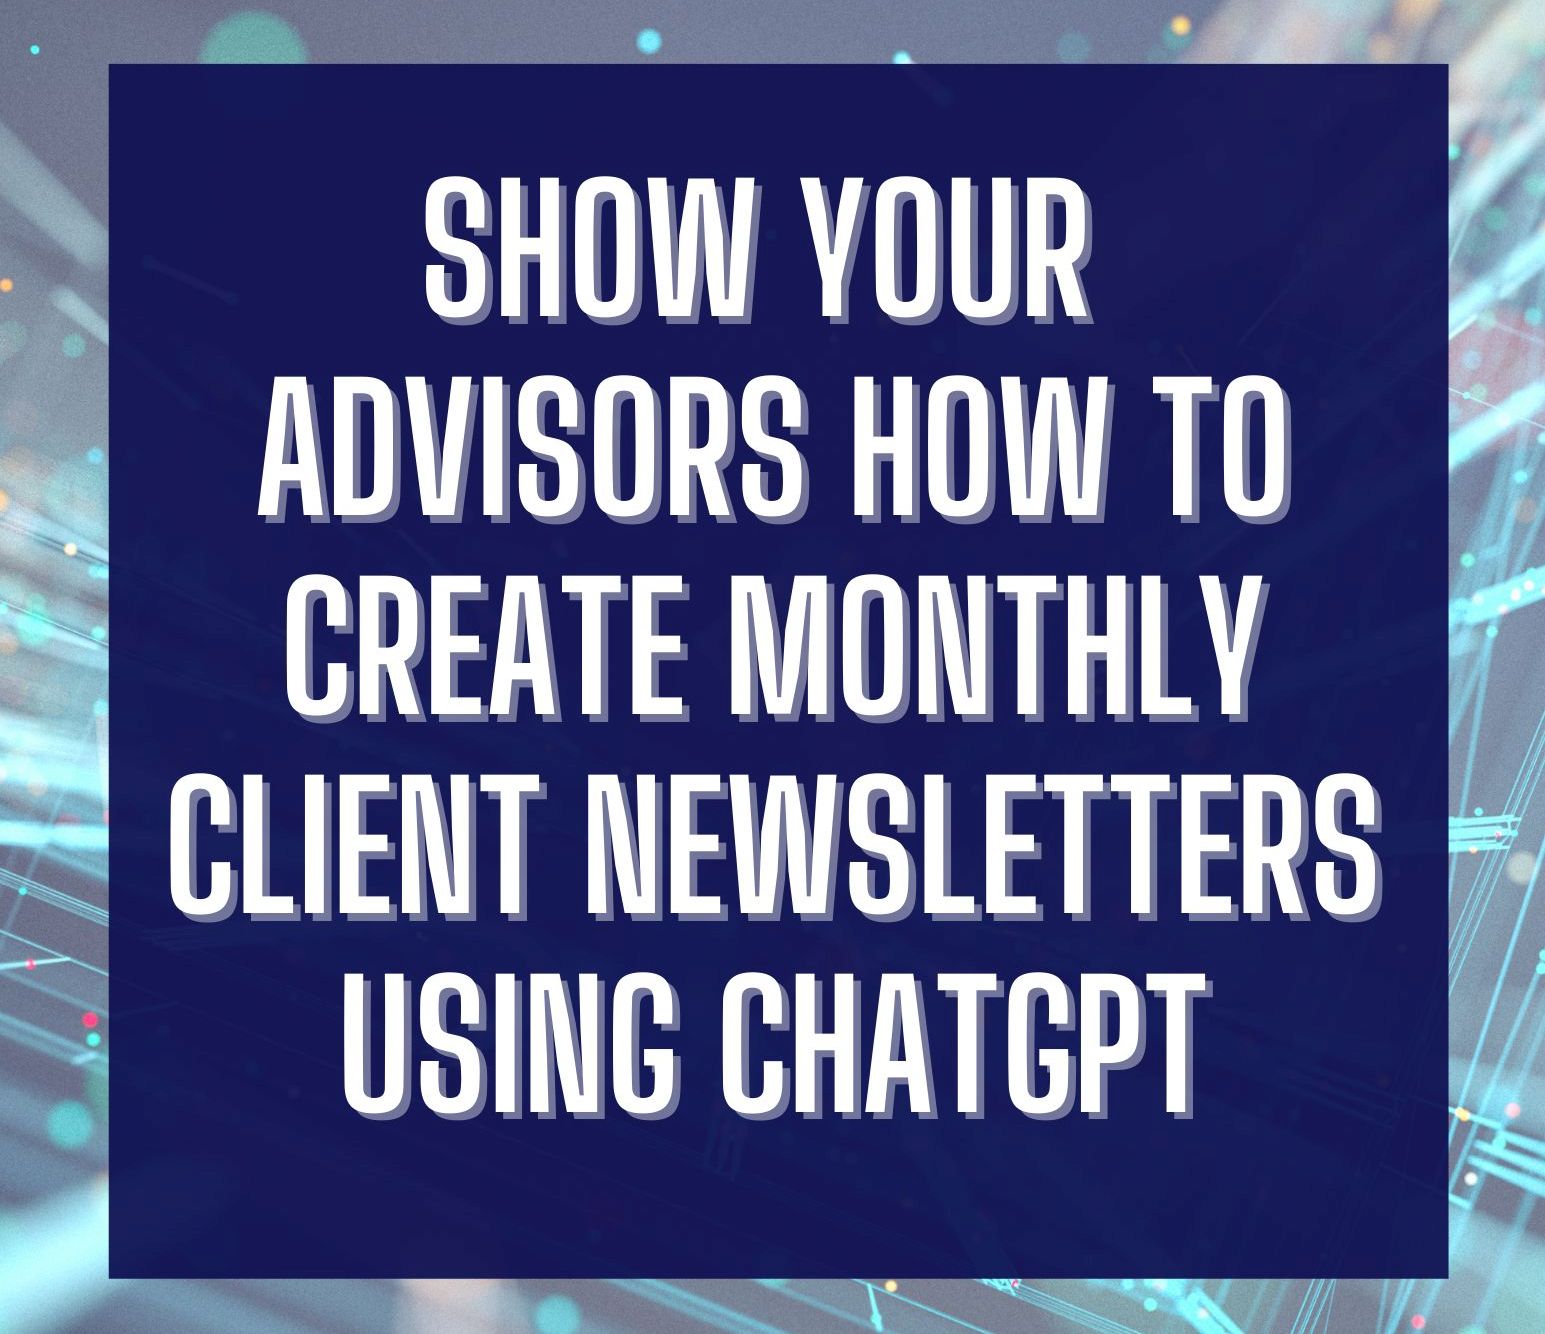 How to create financial advisor to client newsletters using ChatGPT